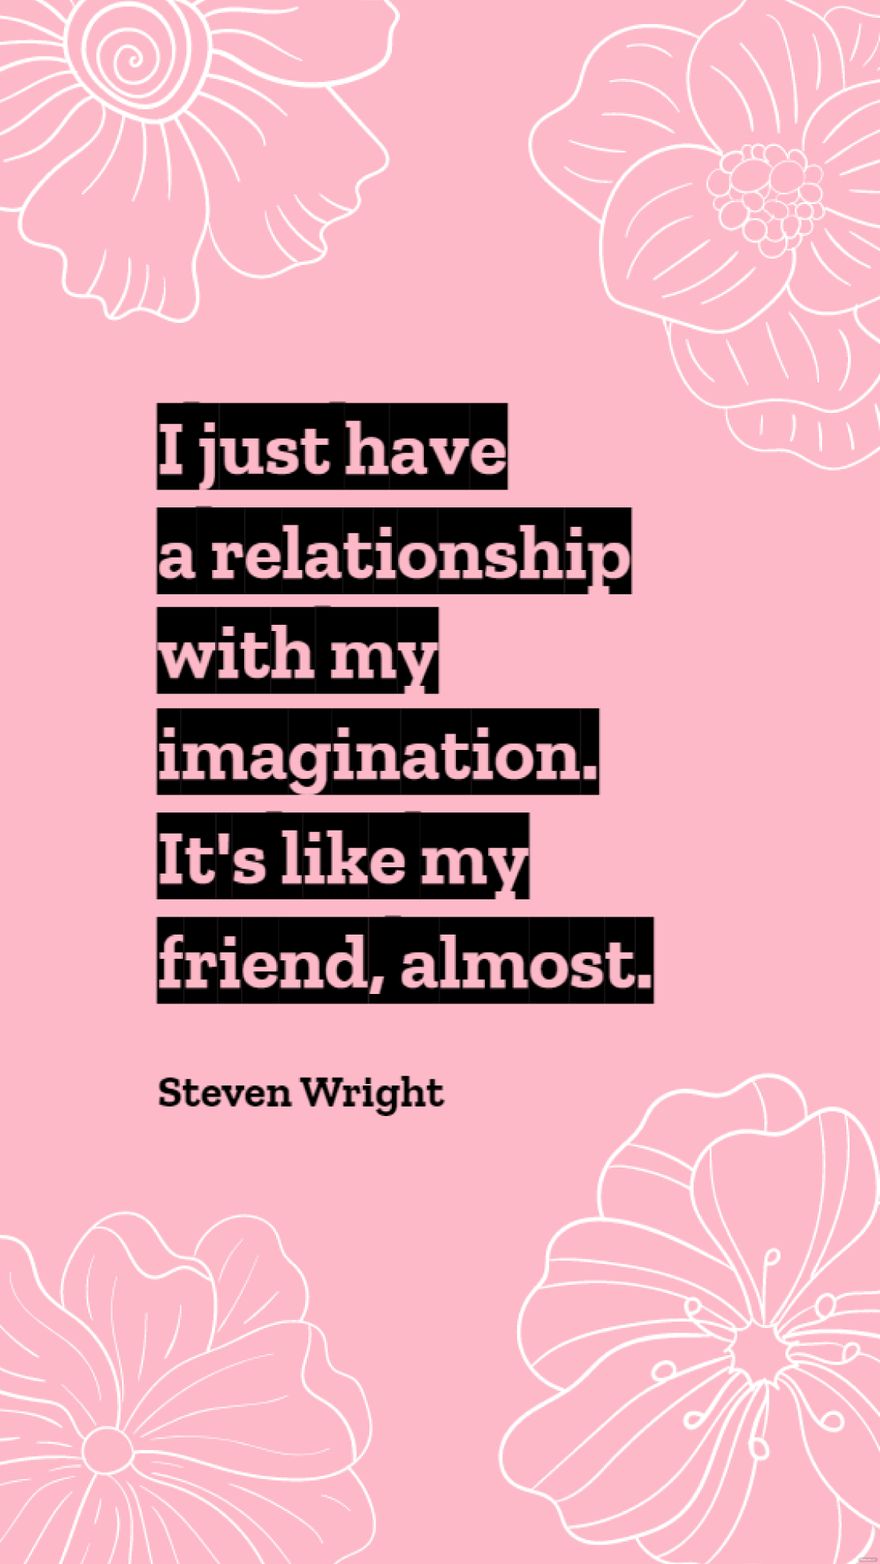 Steven Wright - I just have a relationship with my imagination. It's like my friend, almost.